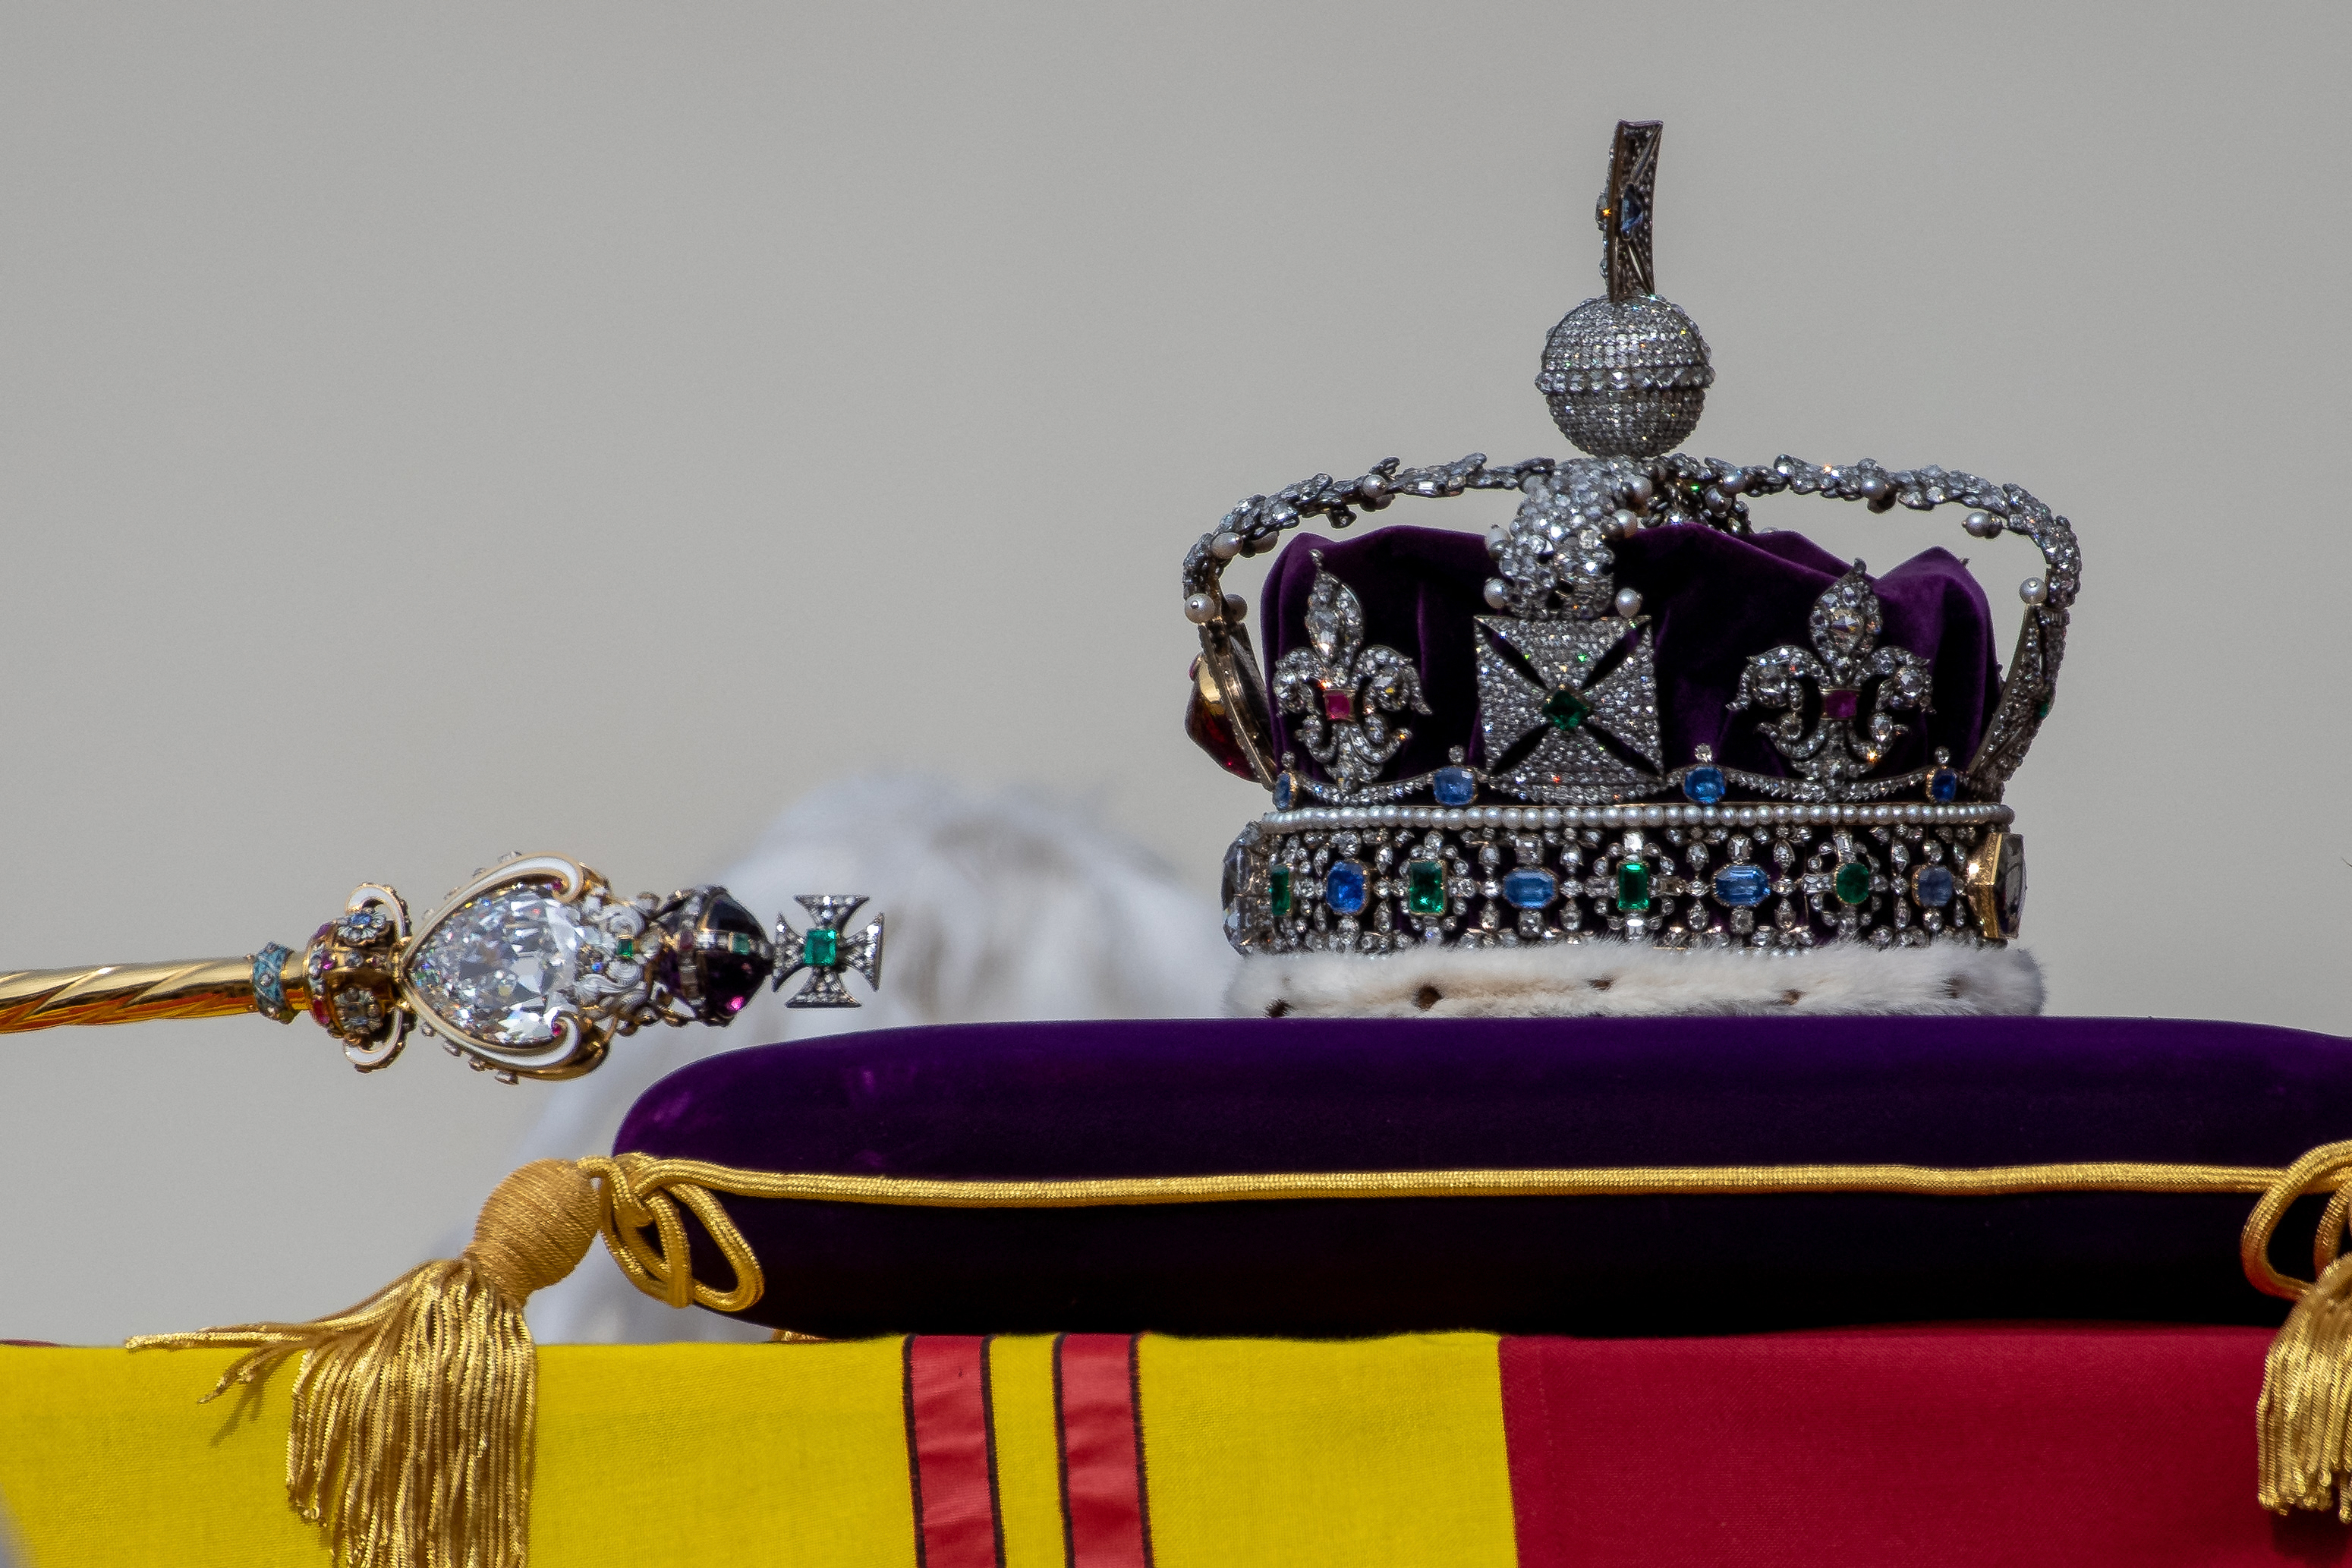 The coffin of Queen Elizabeth II with the Imperial State Crown resting on top is seen during the State Funeral of Queen Elizabeth II in London on September 19, 2022. Chris J Ratcliffe / POOL / AFP